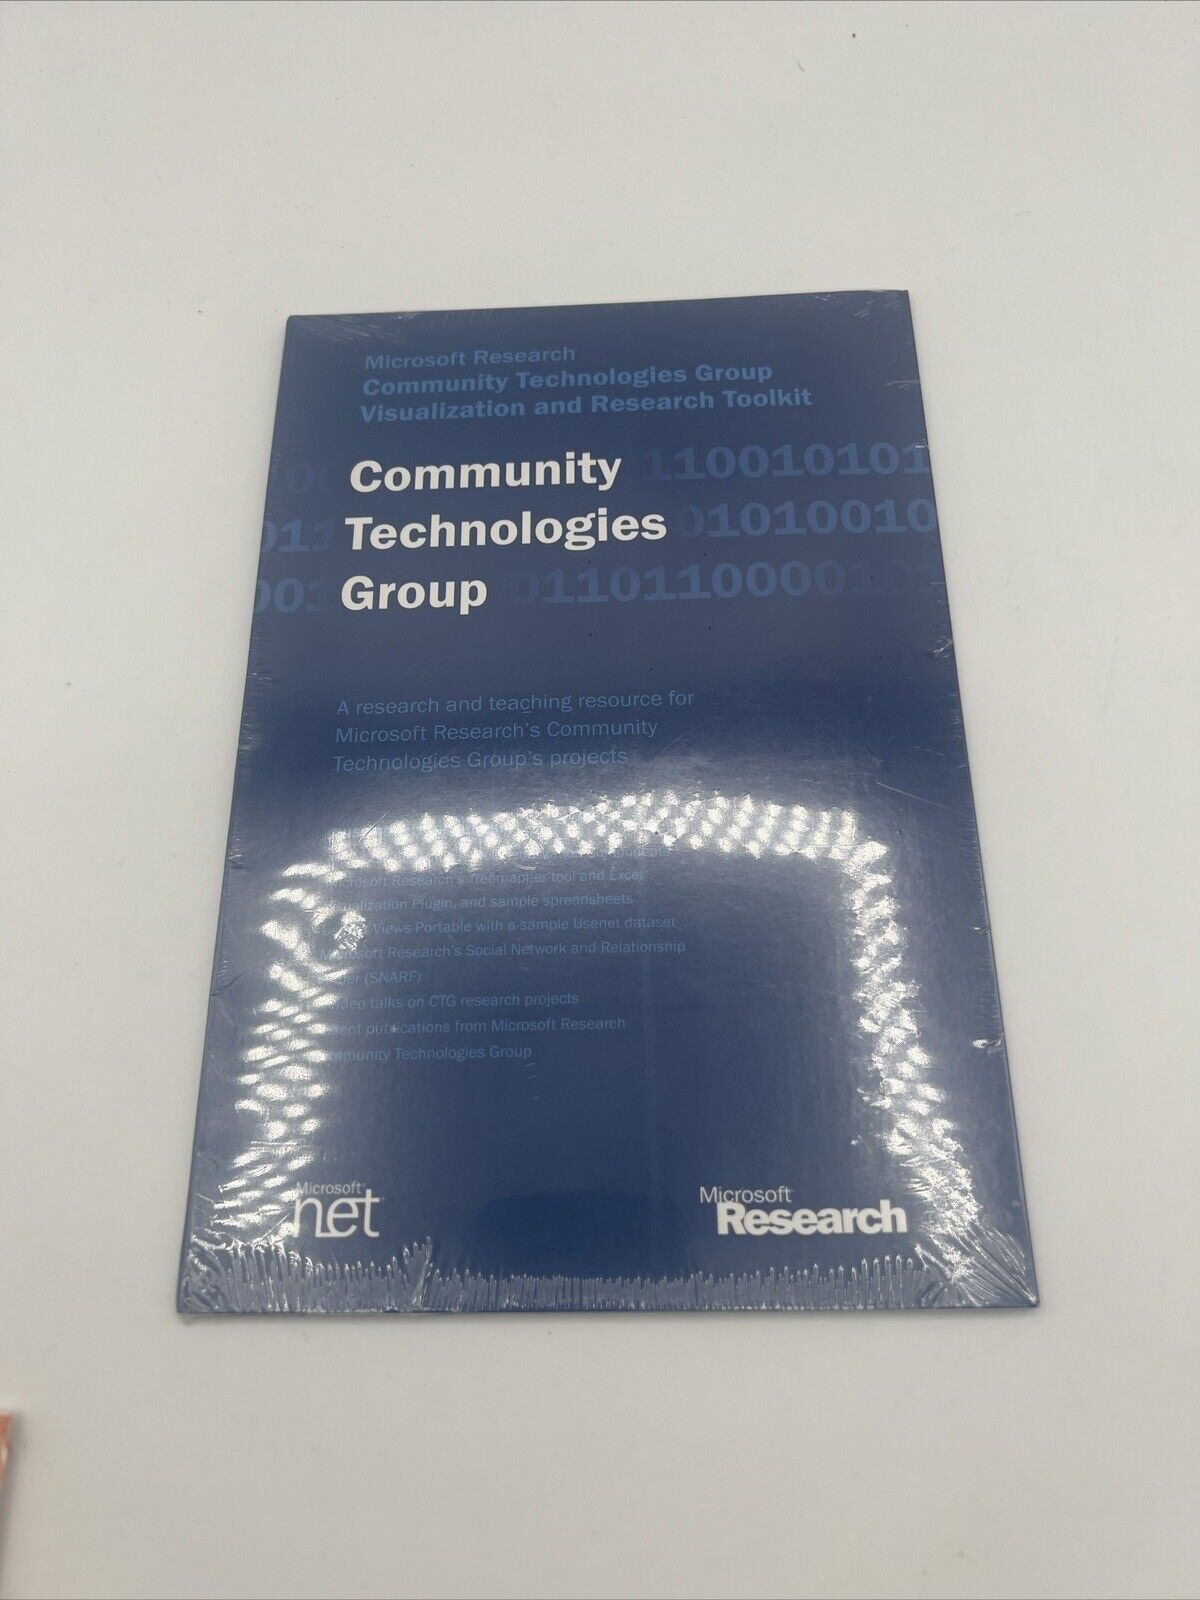 Microsoft Research Community Technologies Group 2004 Toolkit